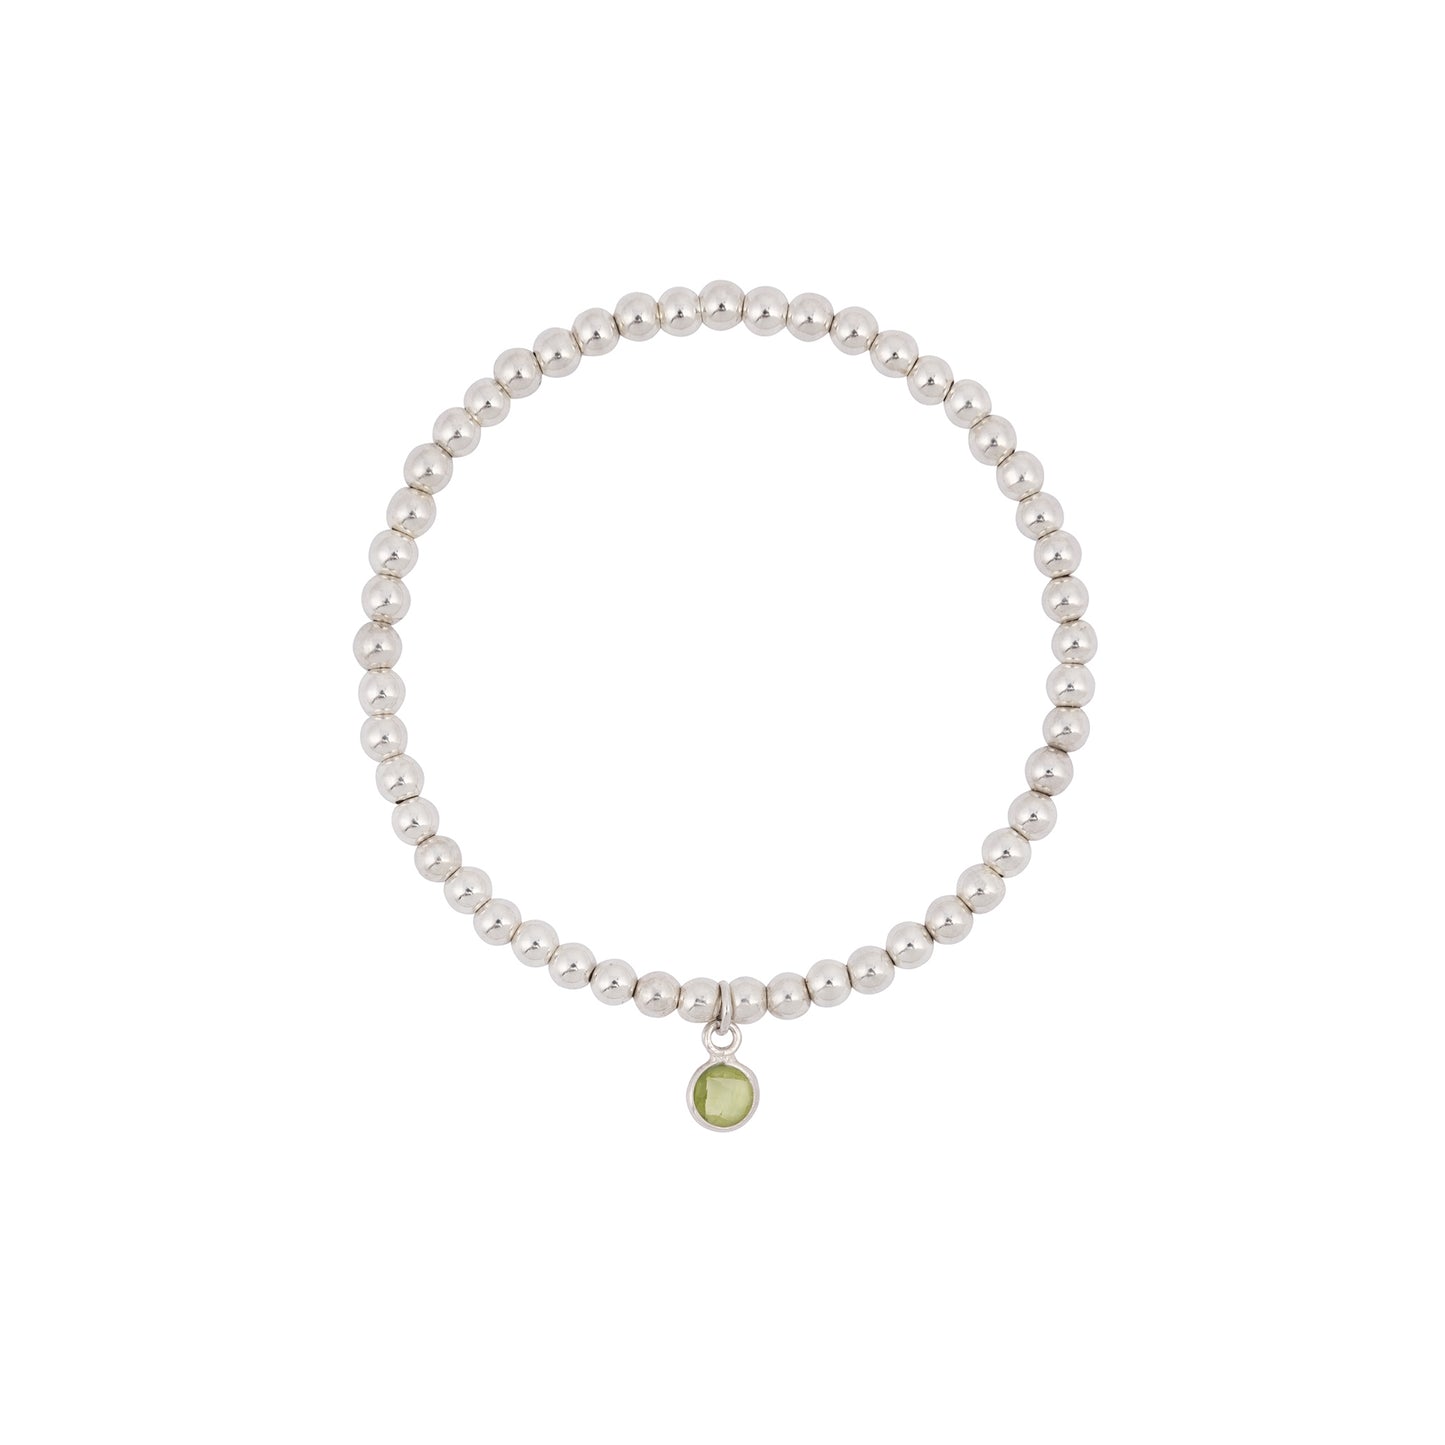 A round, sterling silver beaded Peridot Birthstone Bracelet from Made Here with Love featuring a single dangling green gemstone charm. The bracelet is simple and elegant, with evenly spaced silver beads and the green charm adding a touch of color and interest. Ideal as a peridot birthstone bracelet or for celebrating a 16th wedding anniversary.